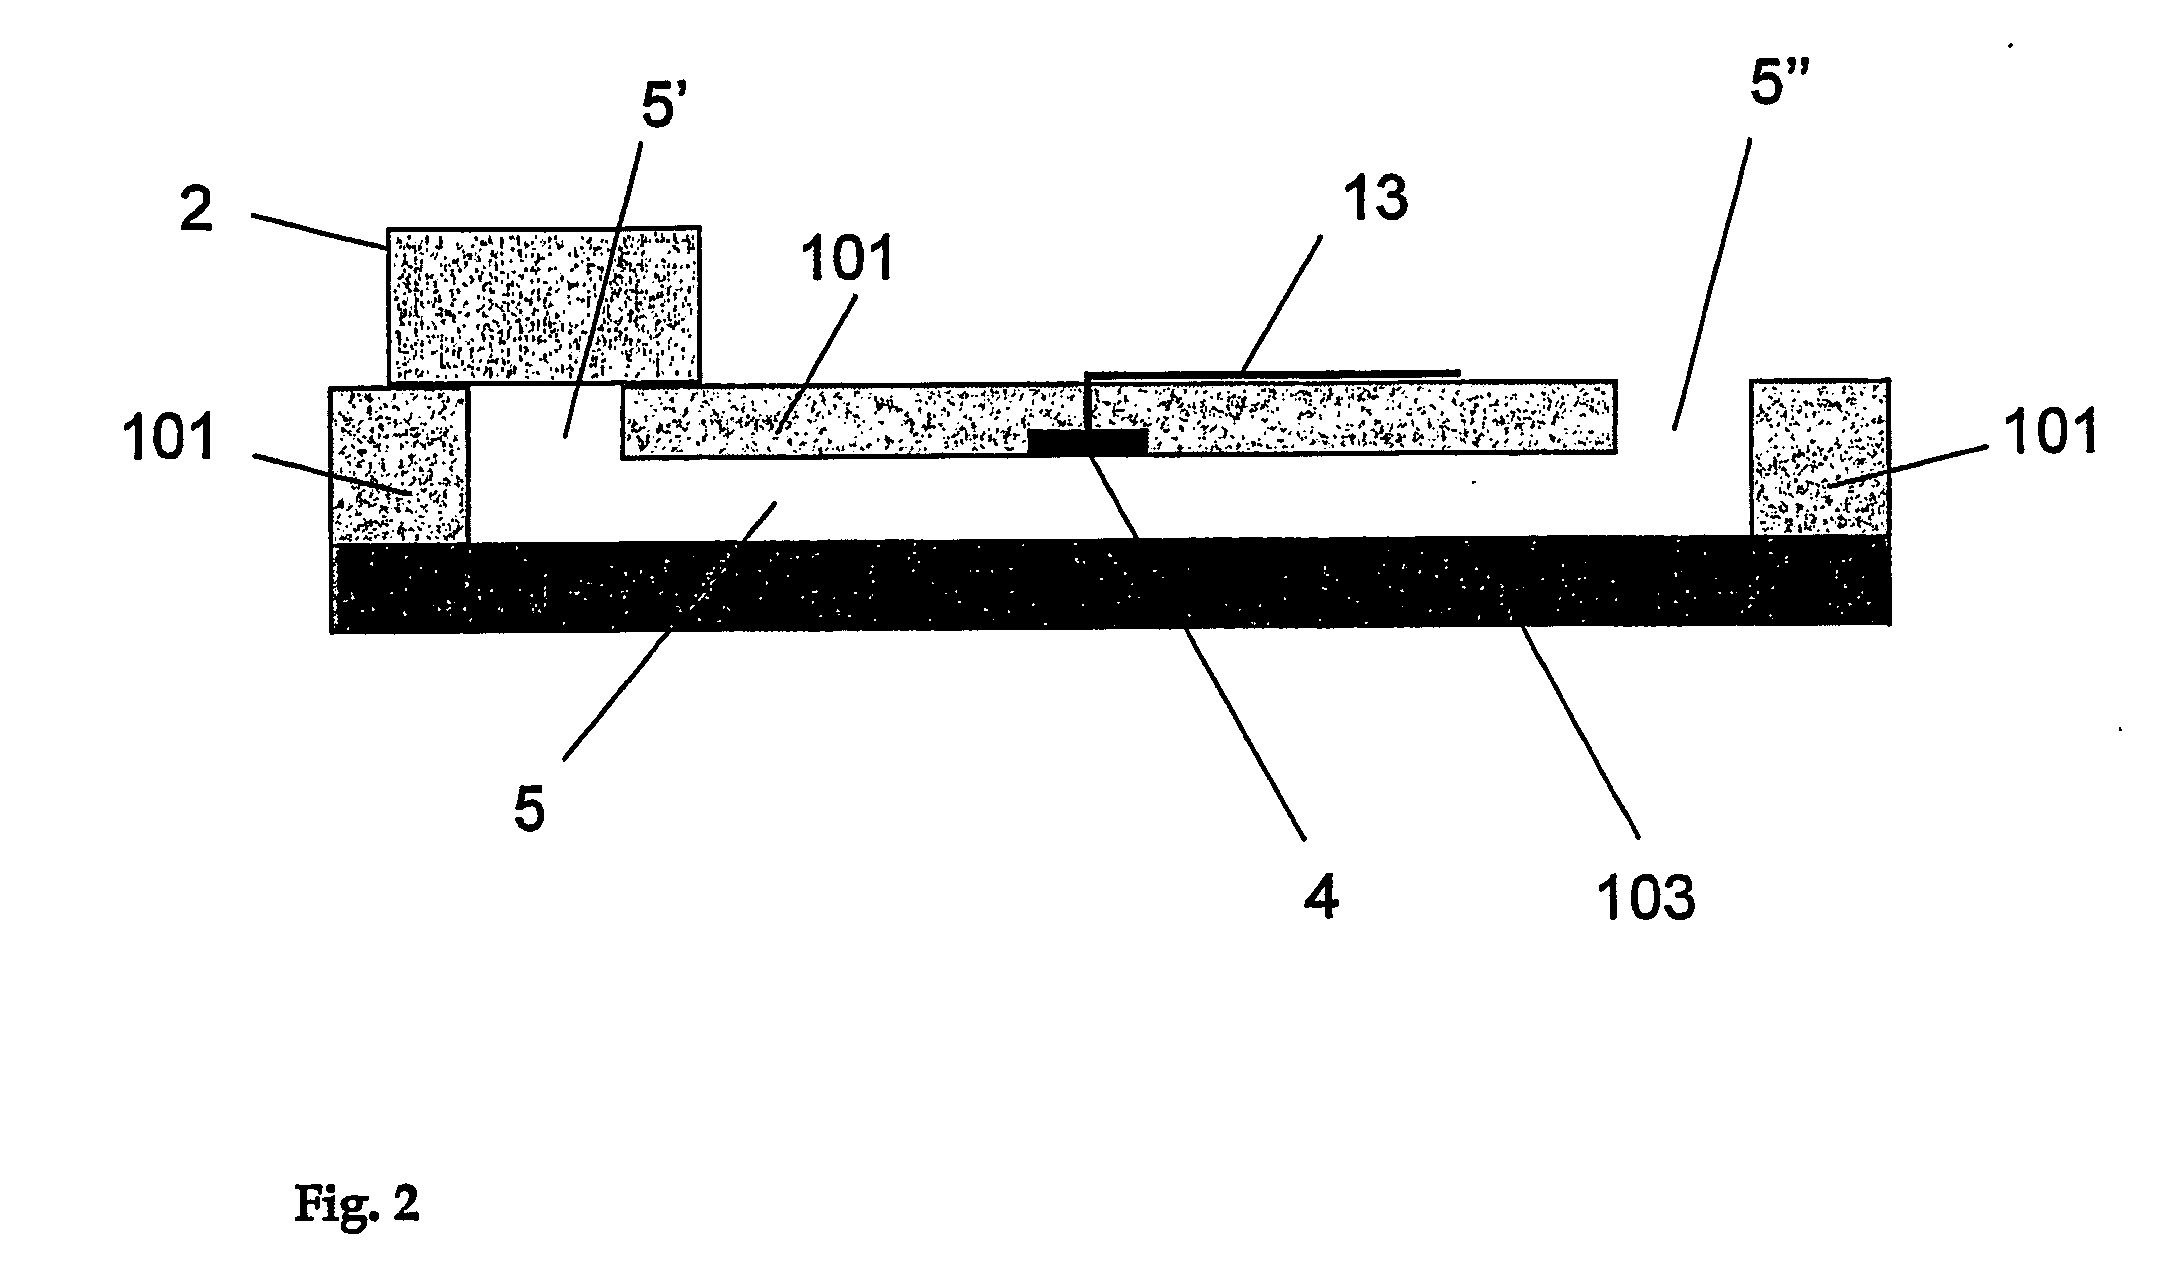 Multi-layered electrochemical microfluidic sensor comprising reagent on porous layer